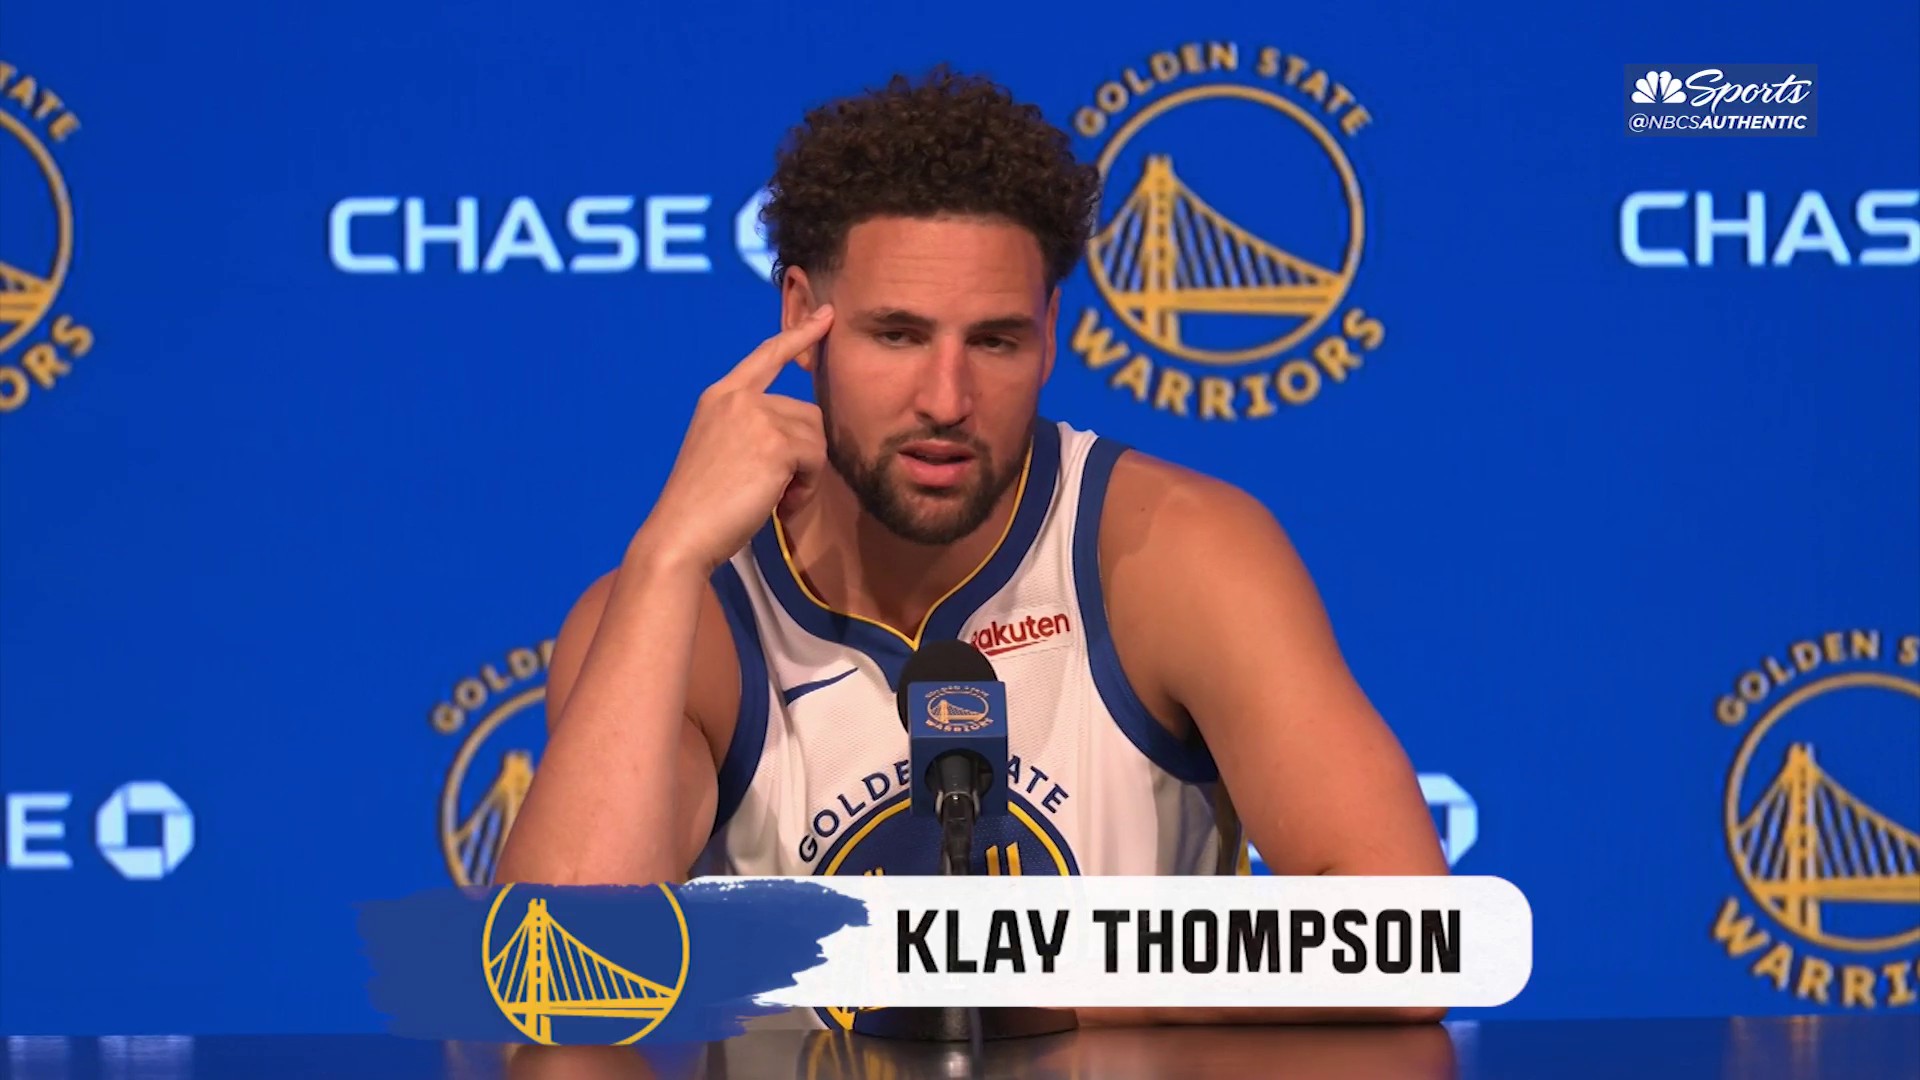 What Klay Thompson said about the possibility of winning it all in